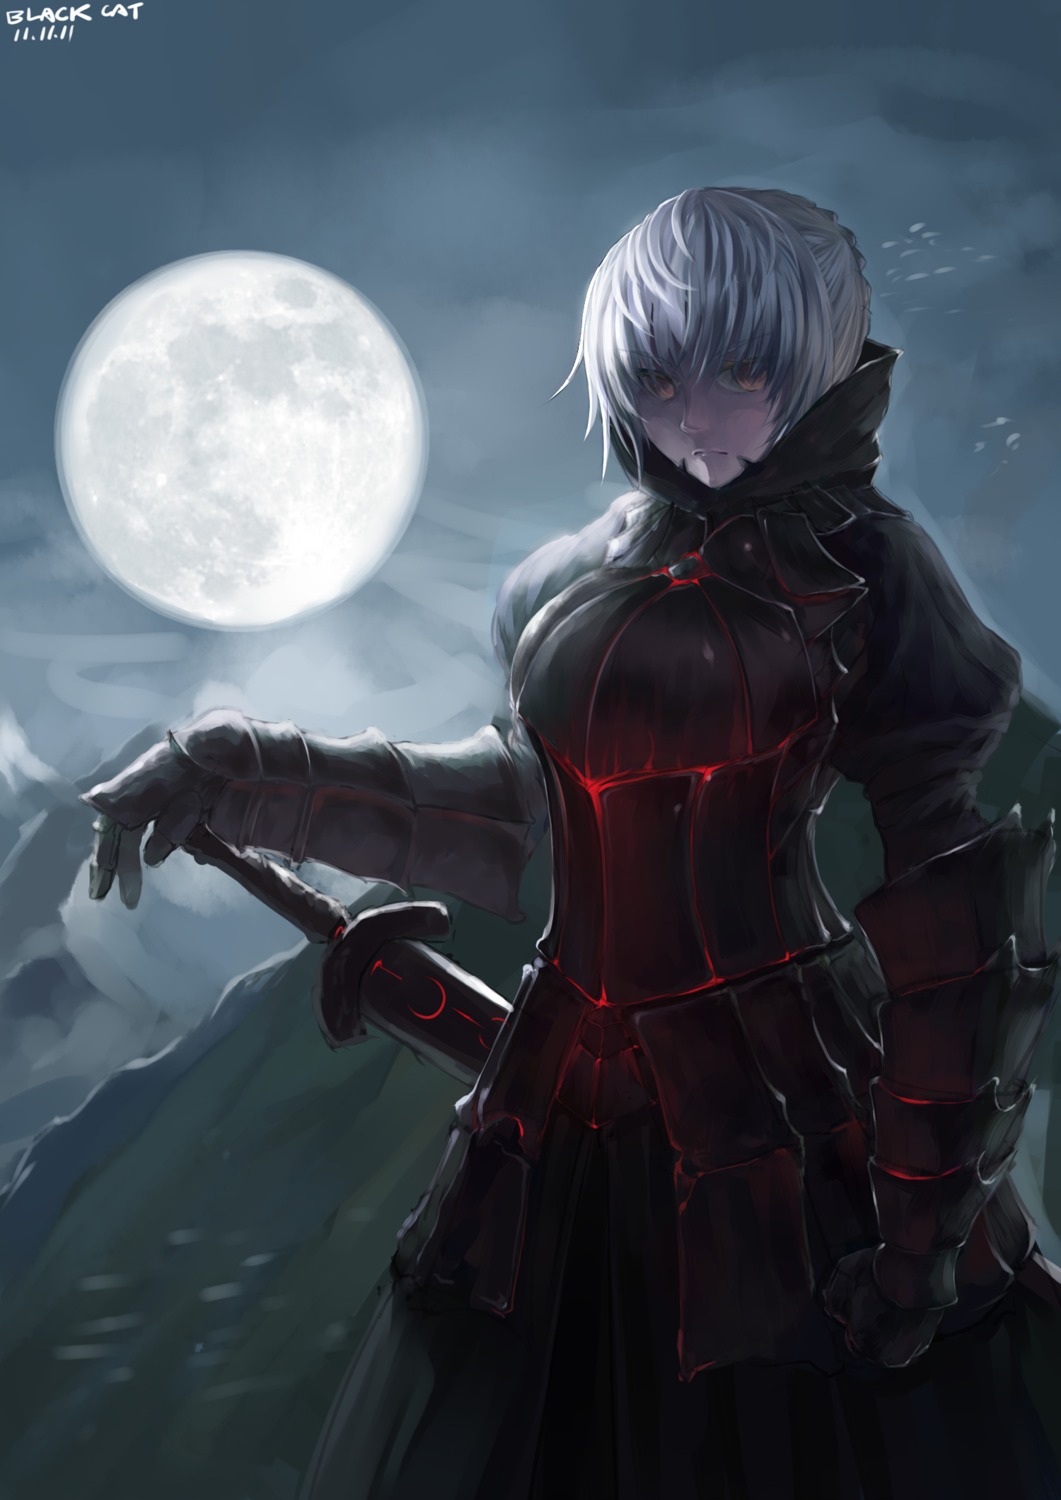 armor black_cat_foot_point fate/stay_night saber saber_alter sword